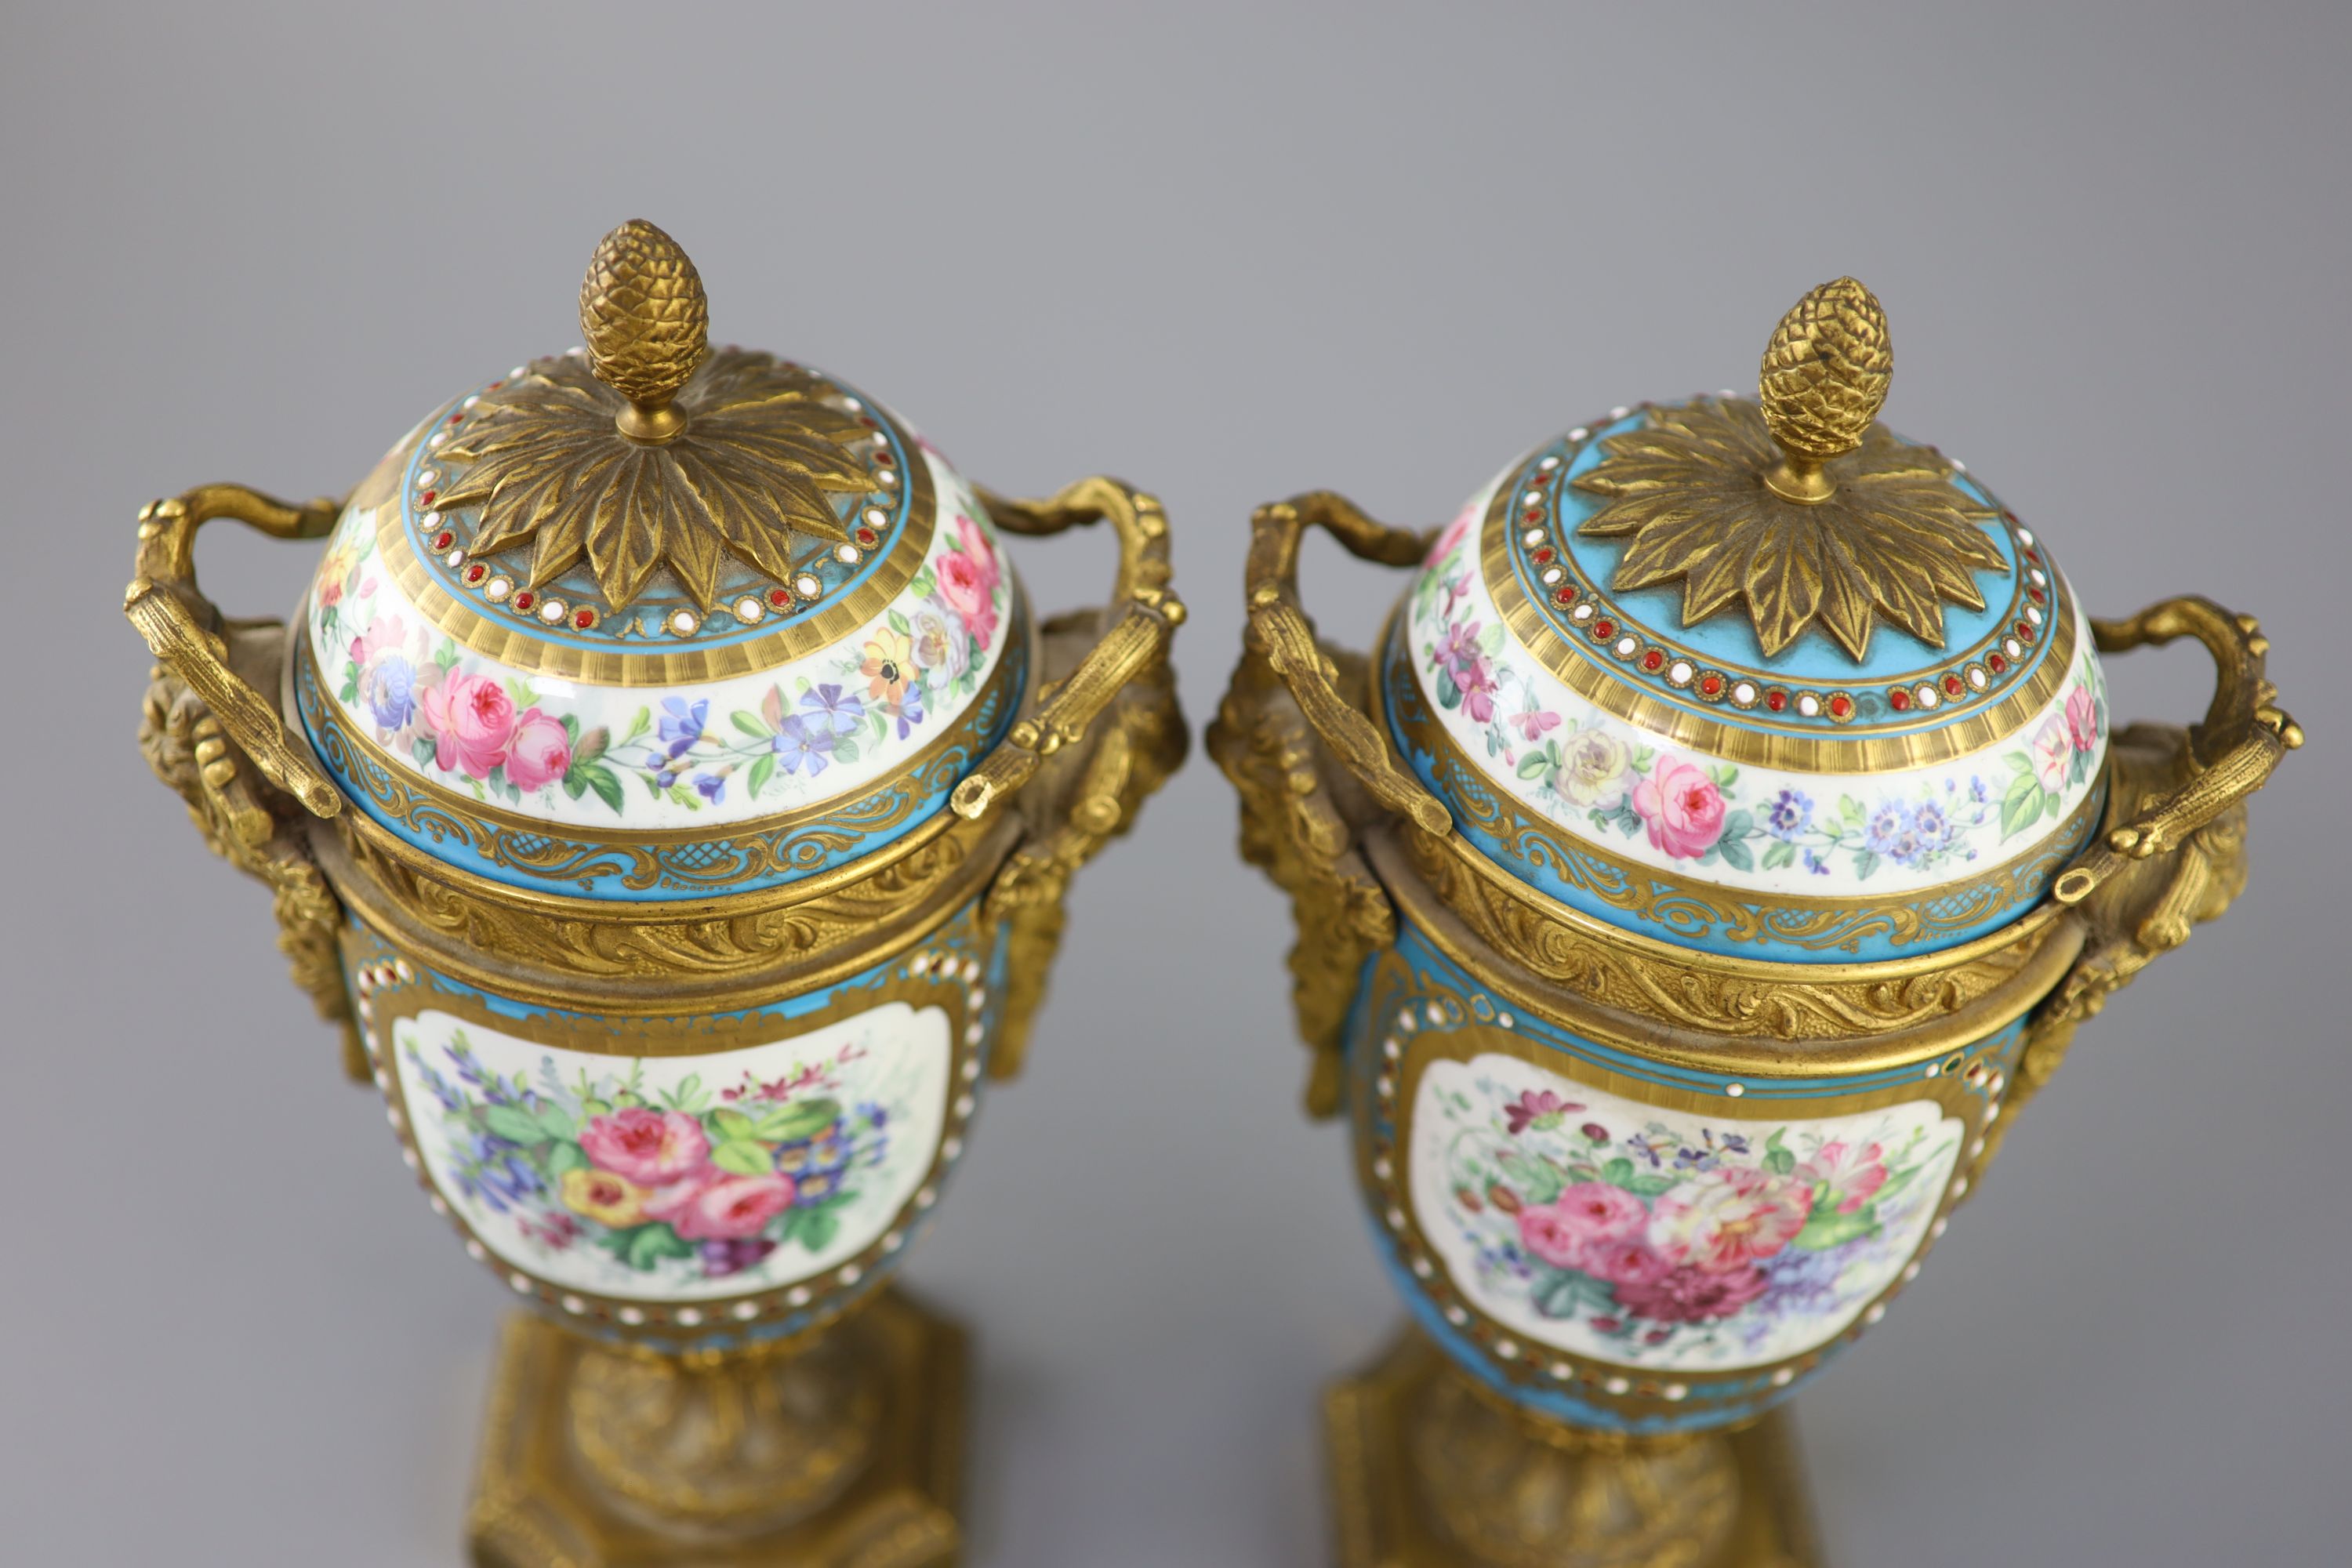 A pair of French Sevres style porcelain and ormolu mounted vases and covers, 19th century, 27cm high